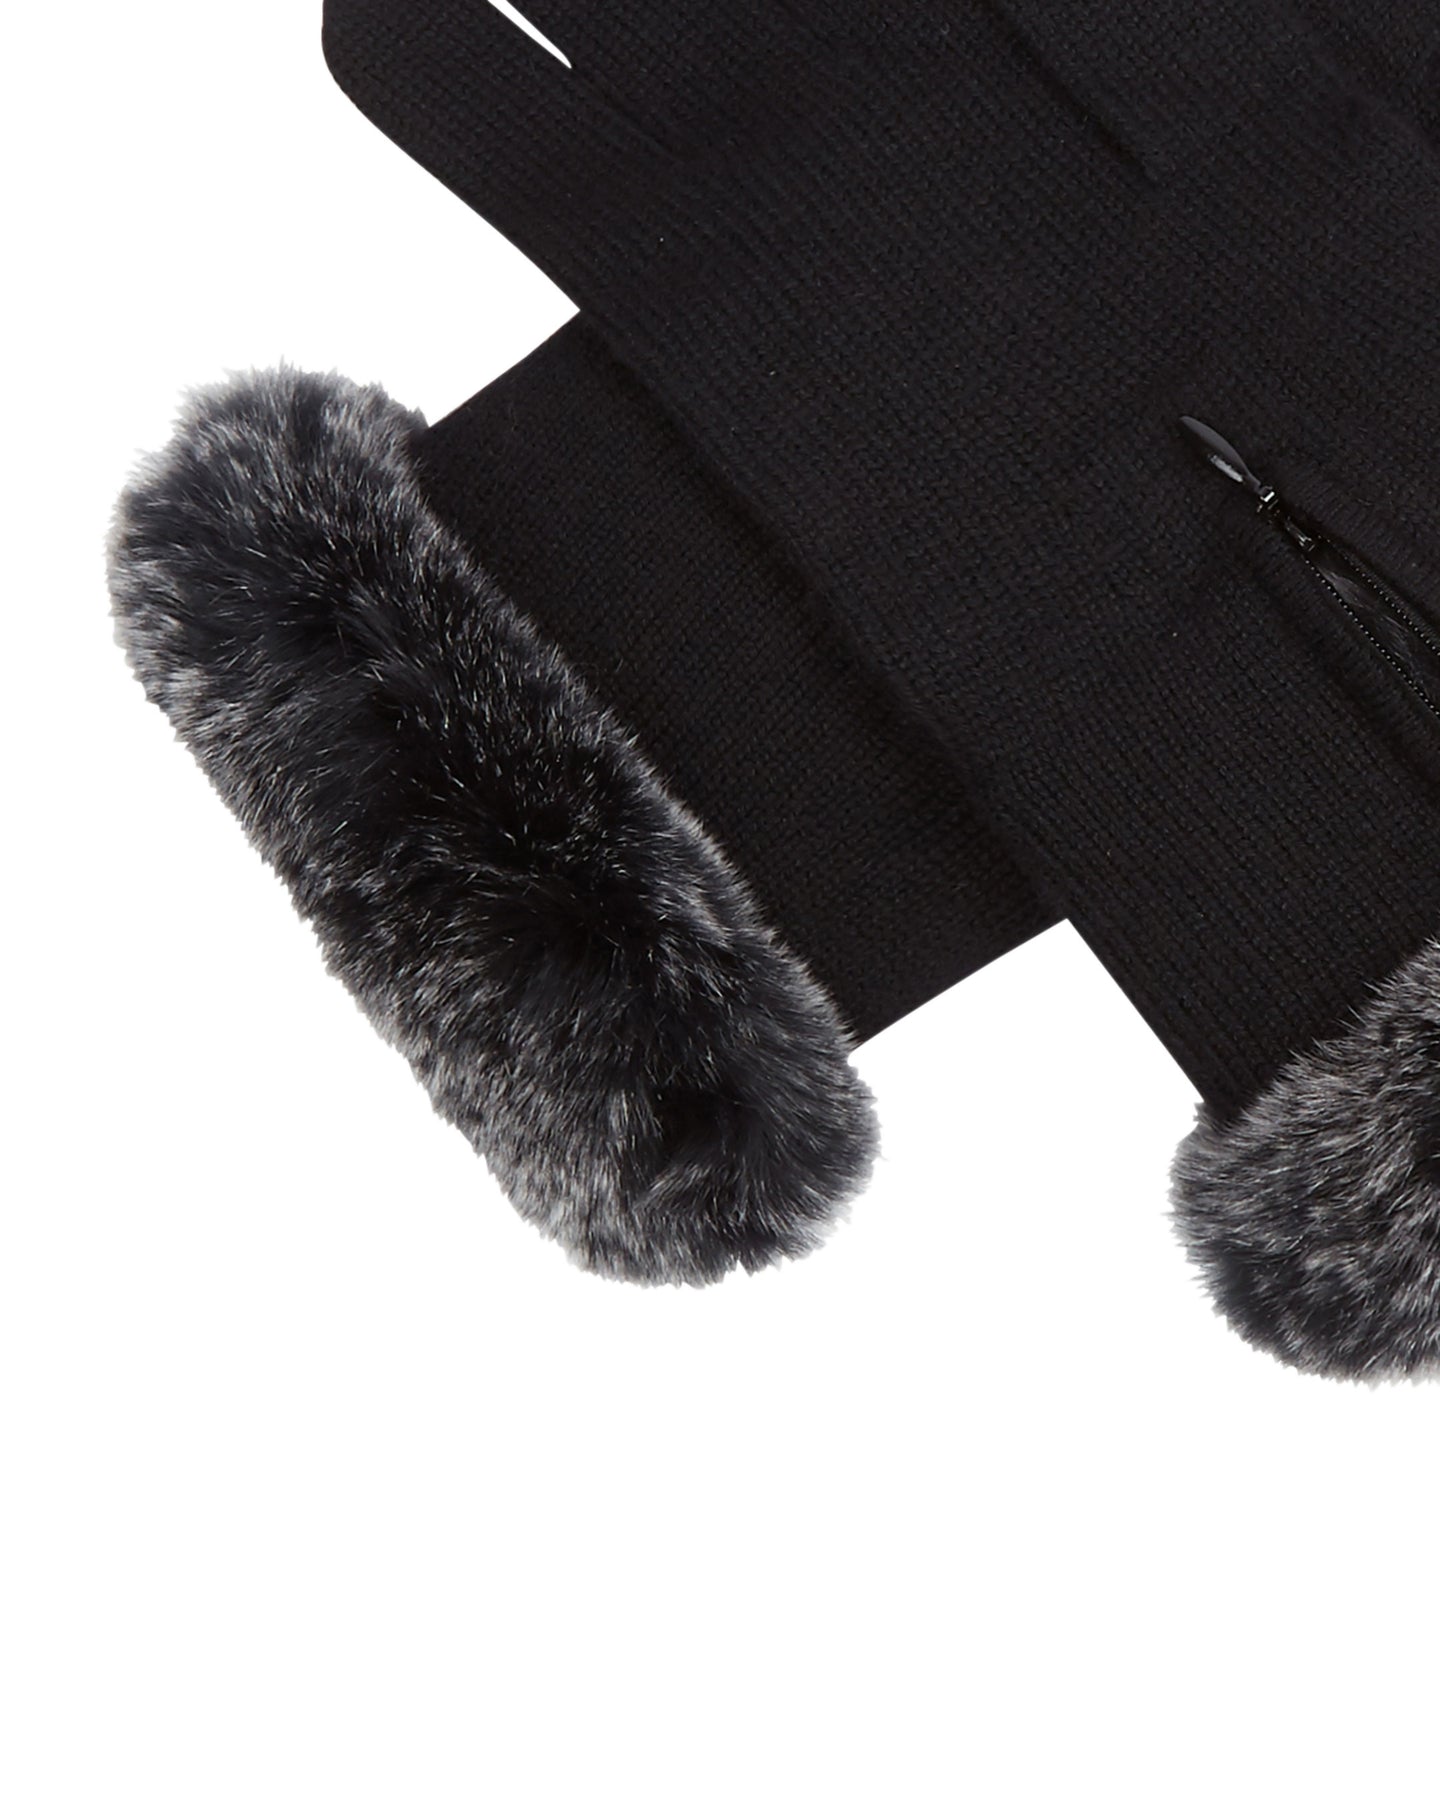 N.Peal Women's Fur And Cashmere Gloves Black